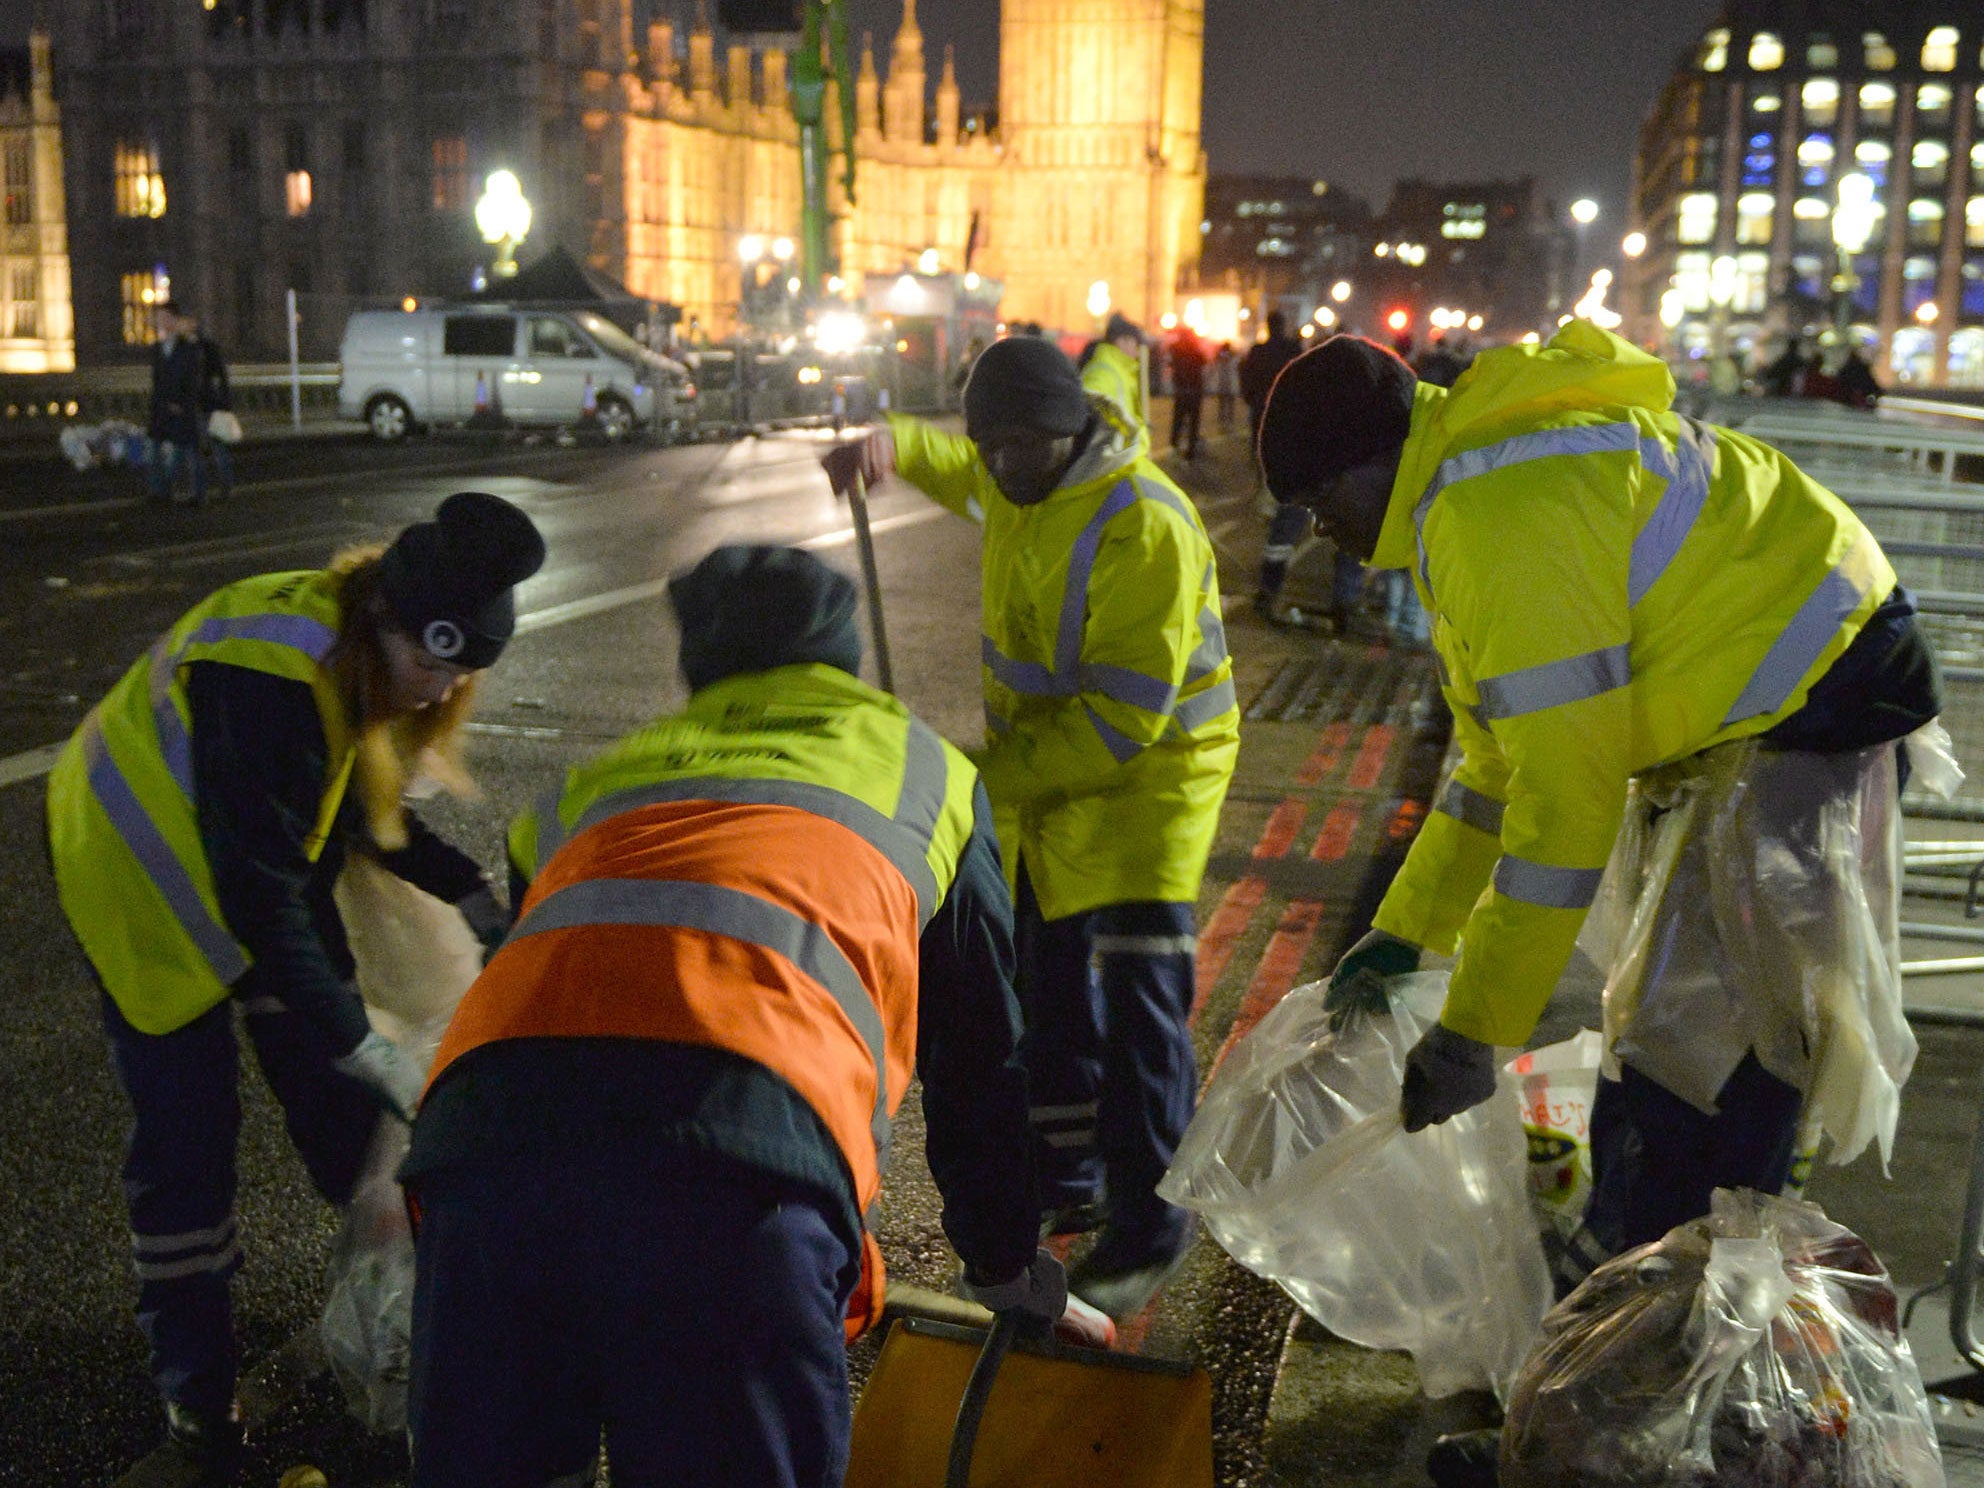 The clean-up begins in central London after the New Year celebration fireworks.